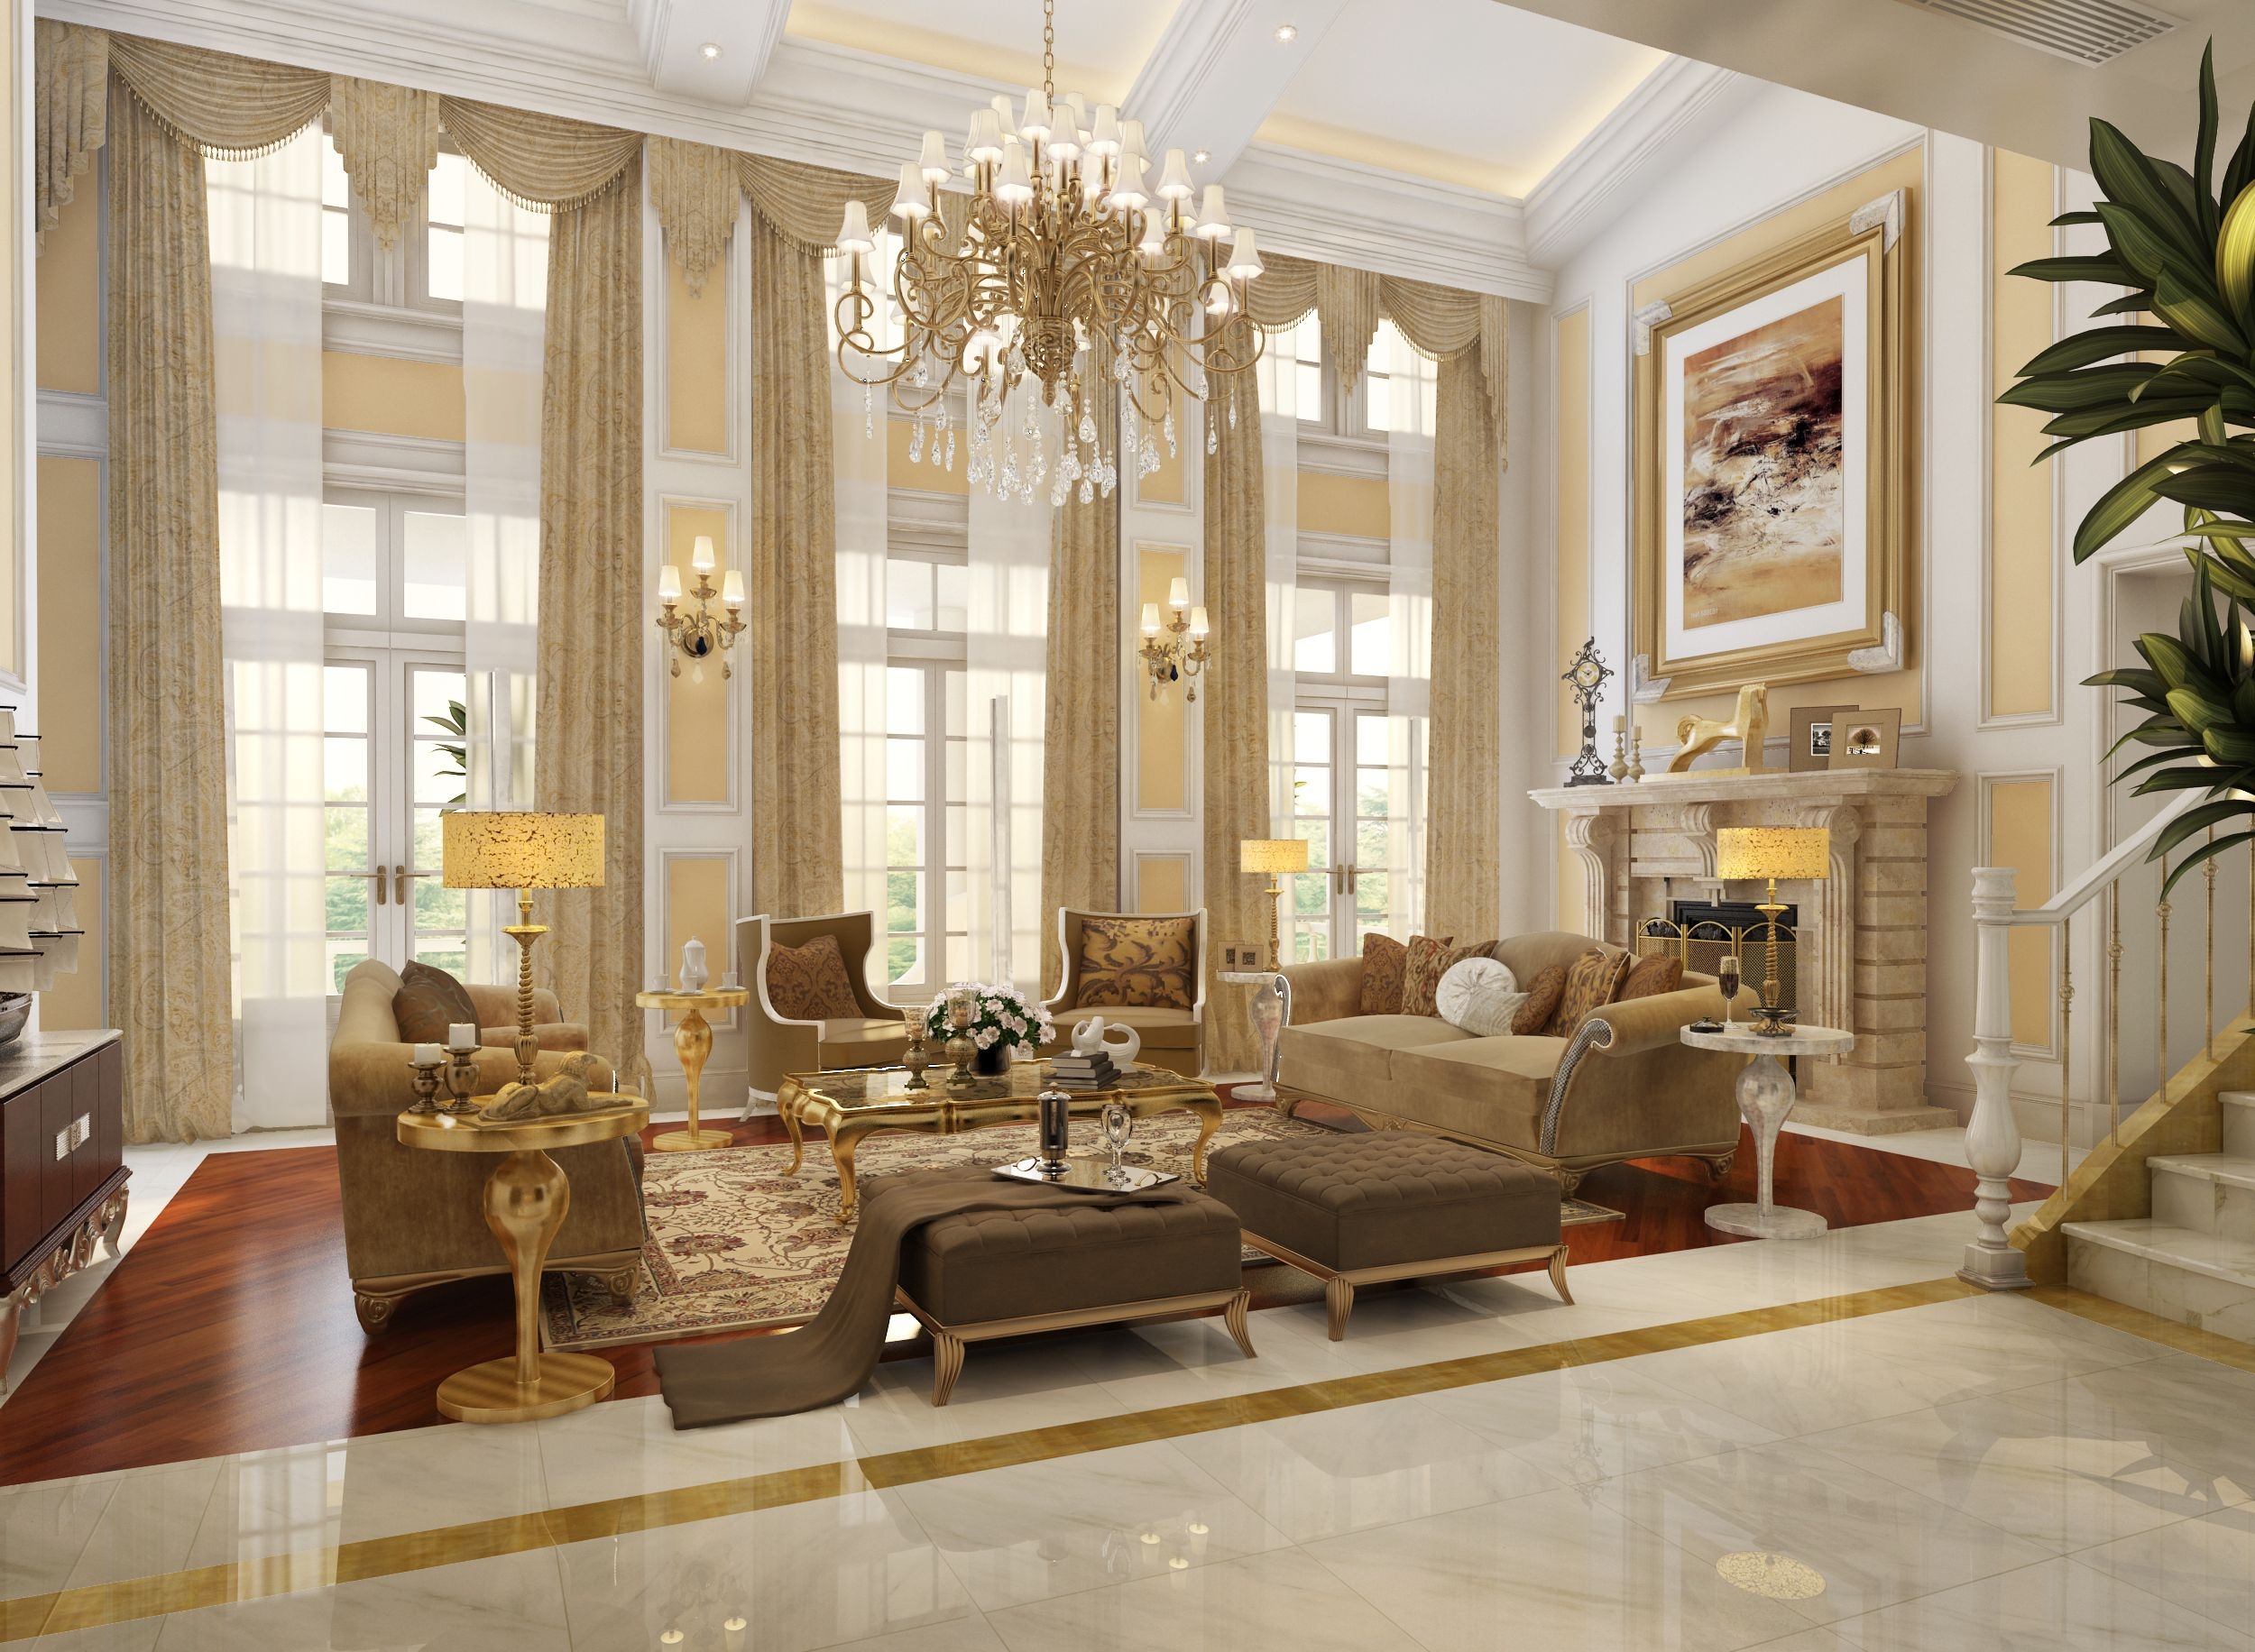 24 Luxurious Interior Design Inspirations For Your New Home with